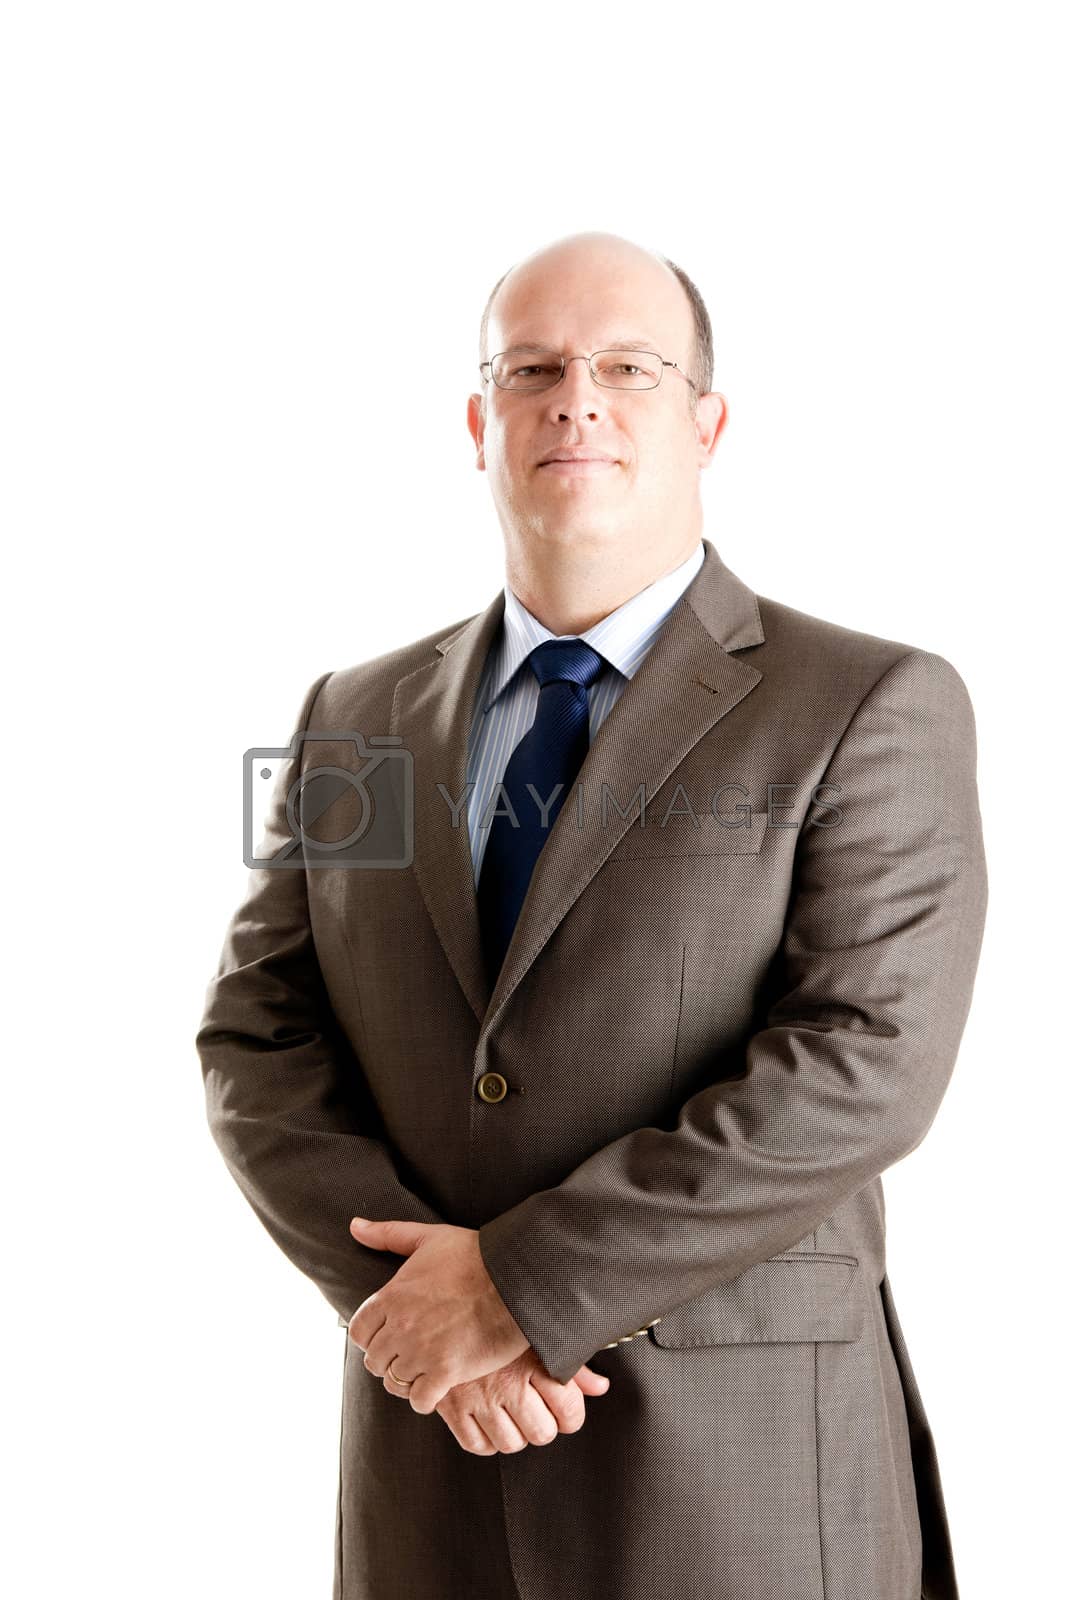 Royalty free image of Businessman  by Iko